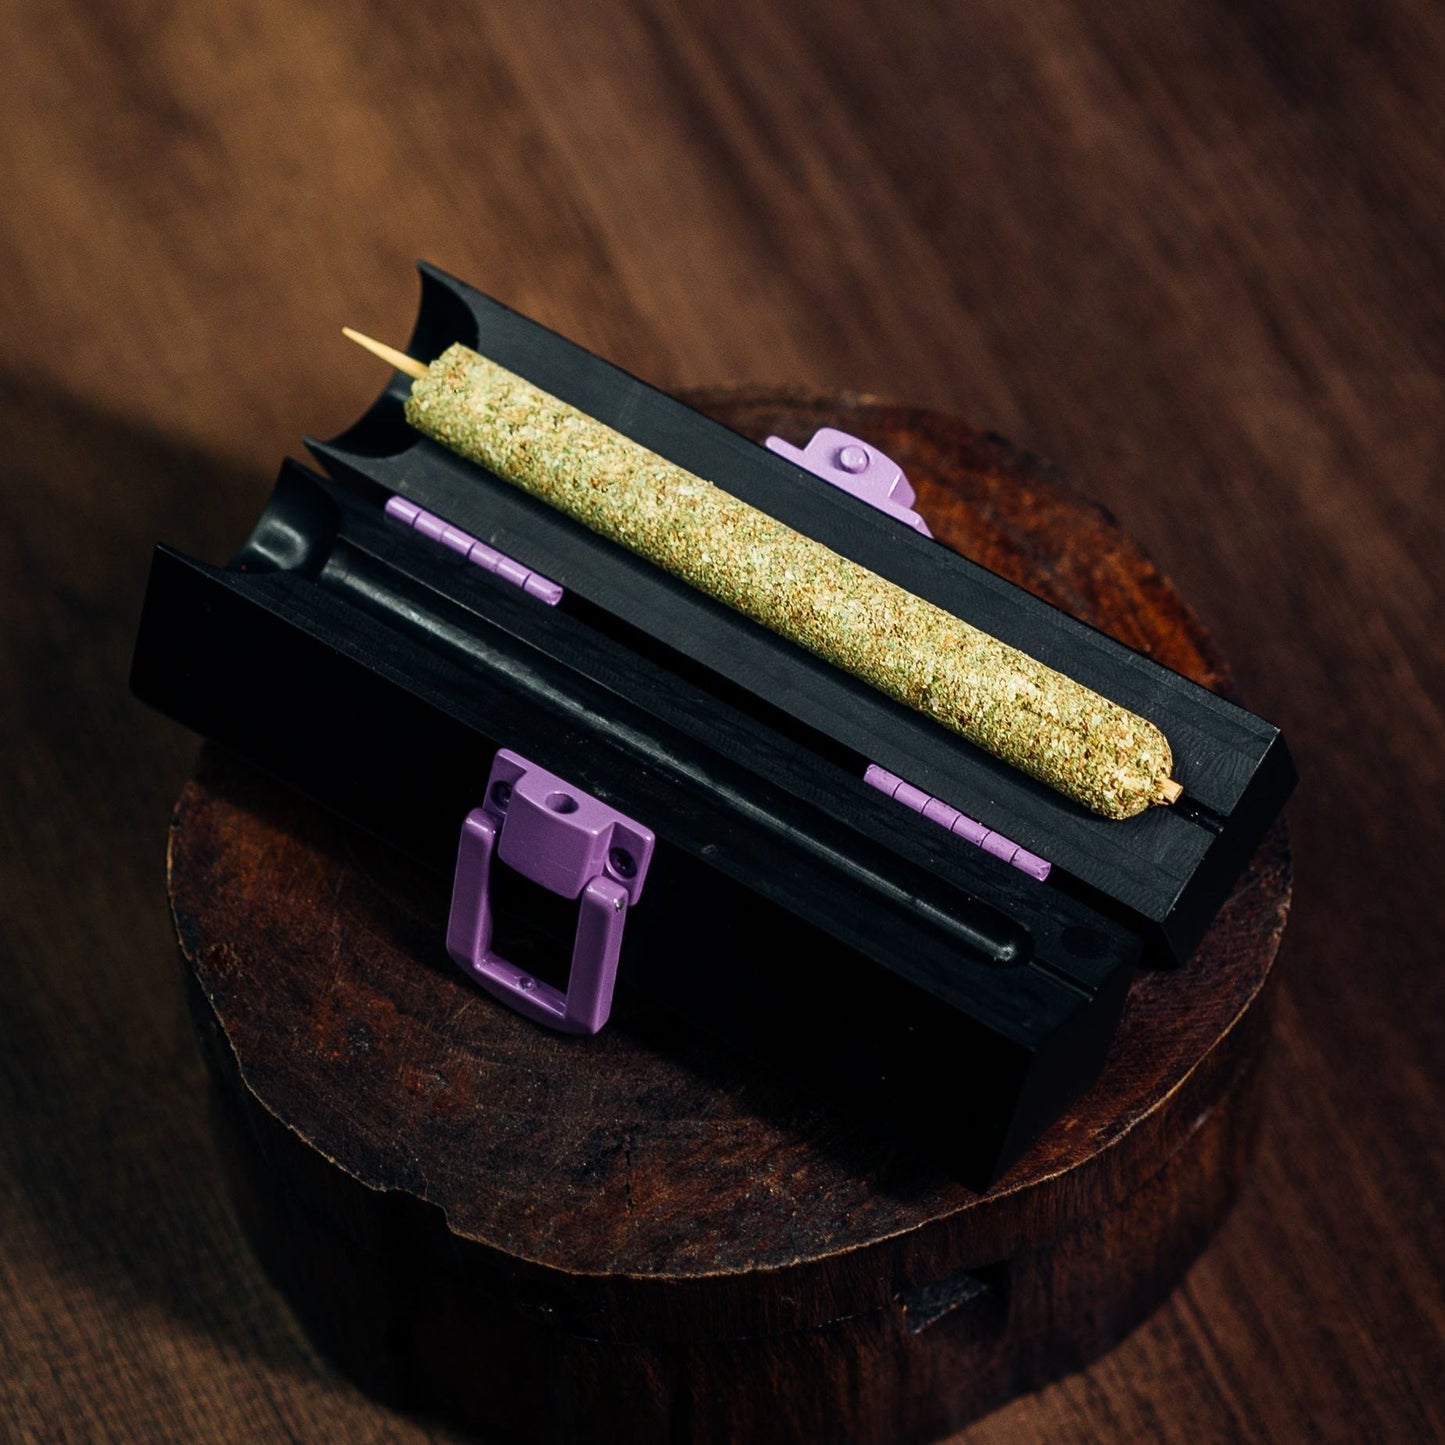 3 Musketeers Purple Rose Supply blunt roller, cannagar mold, joint roller, blunt wrap, joint vs blunt, blunt vs joint, preroll, pre-roll, hemp wrap, hemp blunt